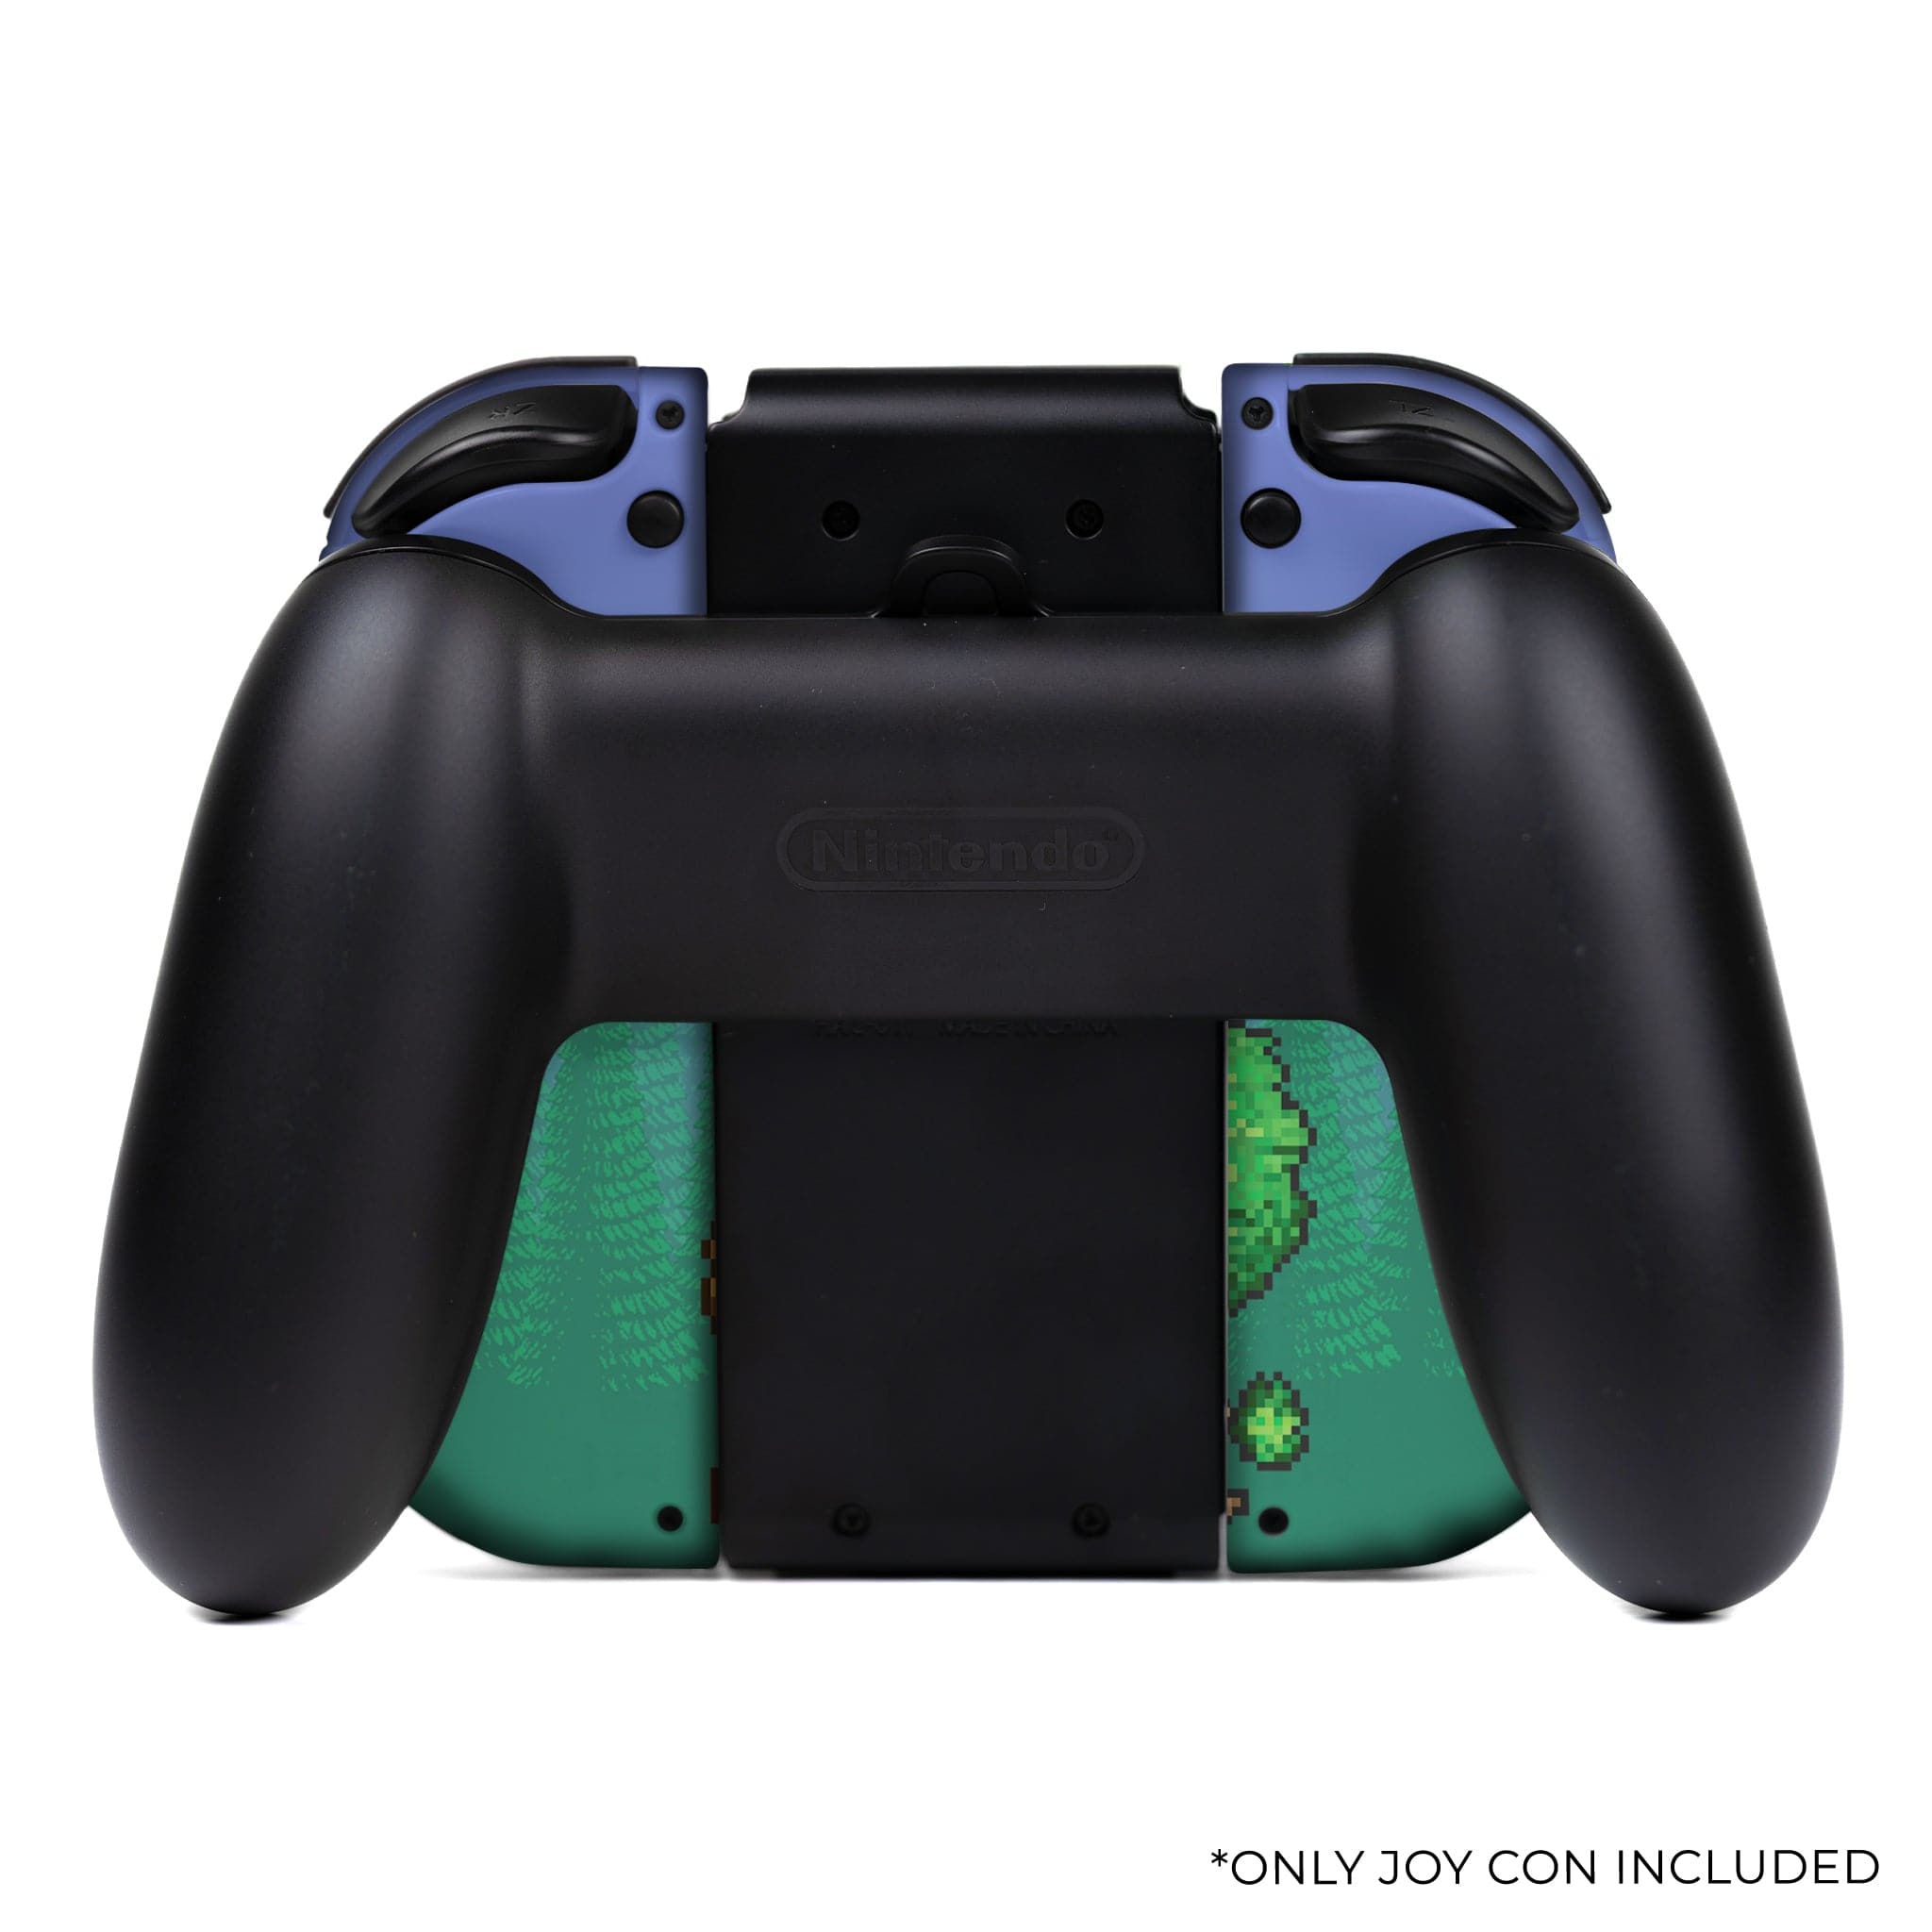 Terraria Inspired Nintendo Switch Joy-Con Left and Right Switch Controllers by Nintendo